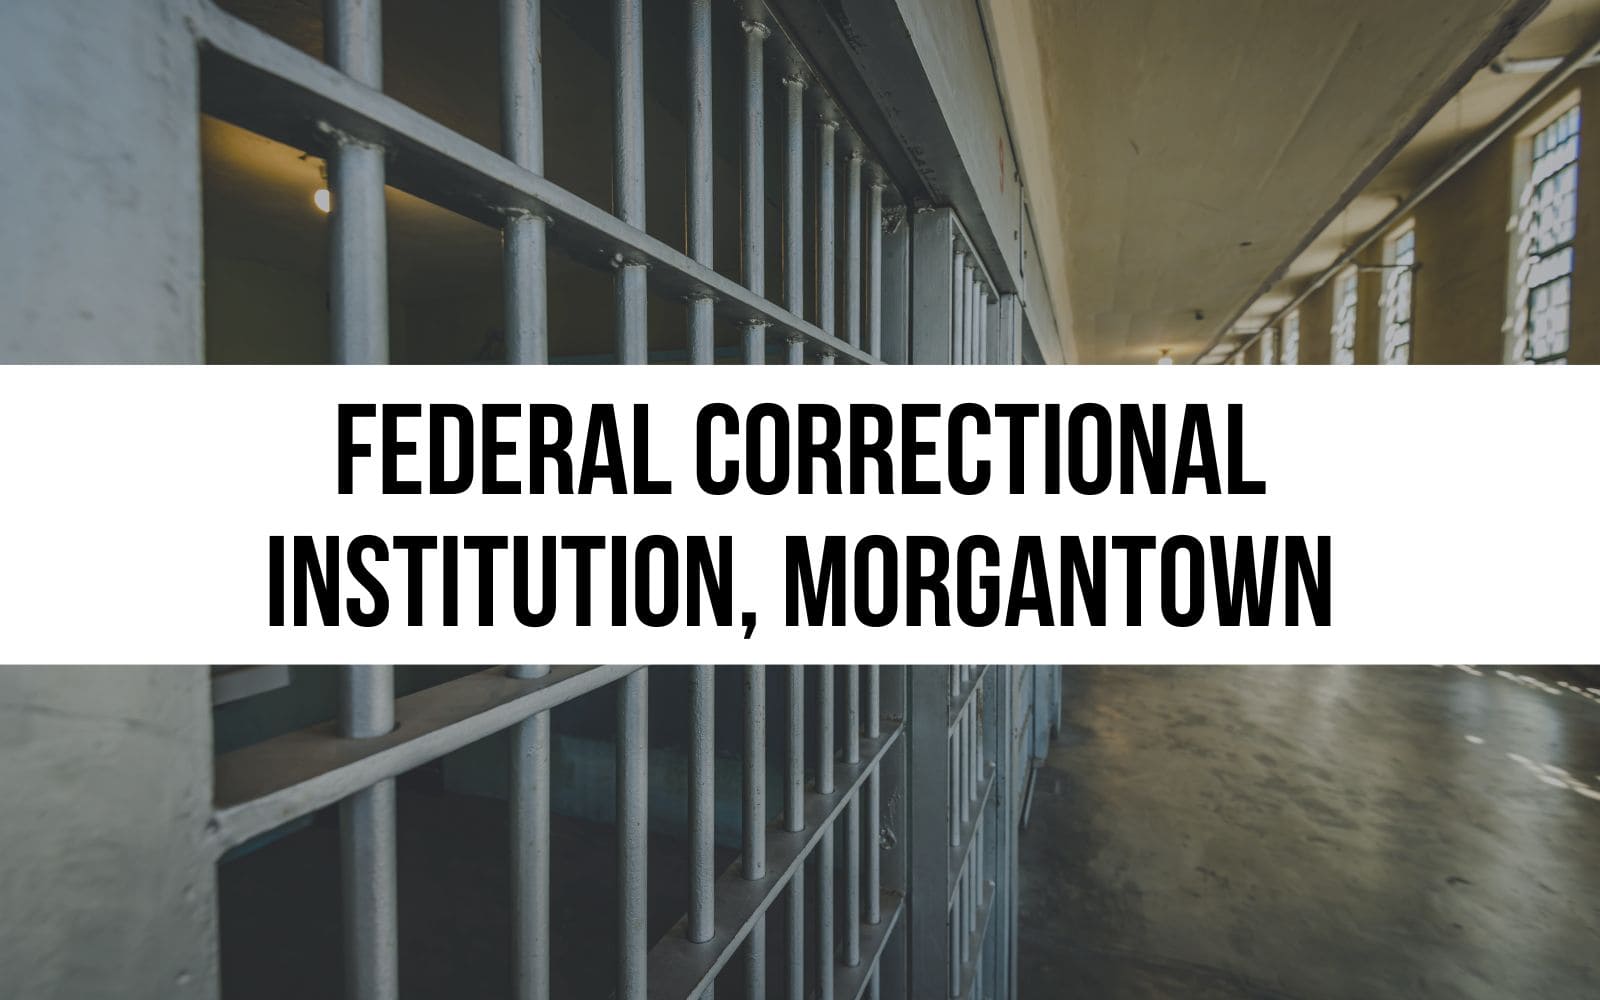 Federal Correctional Institution Morgantown